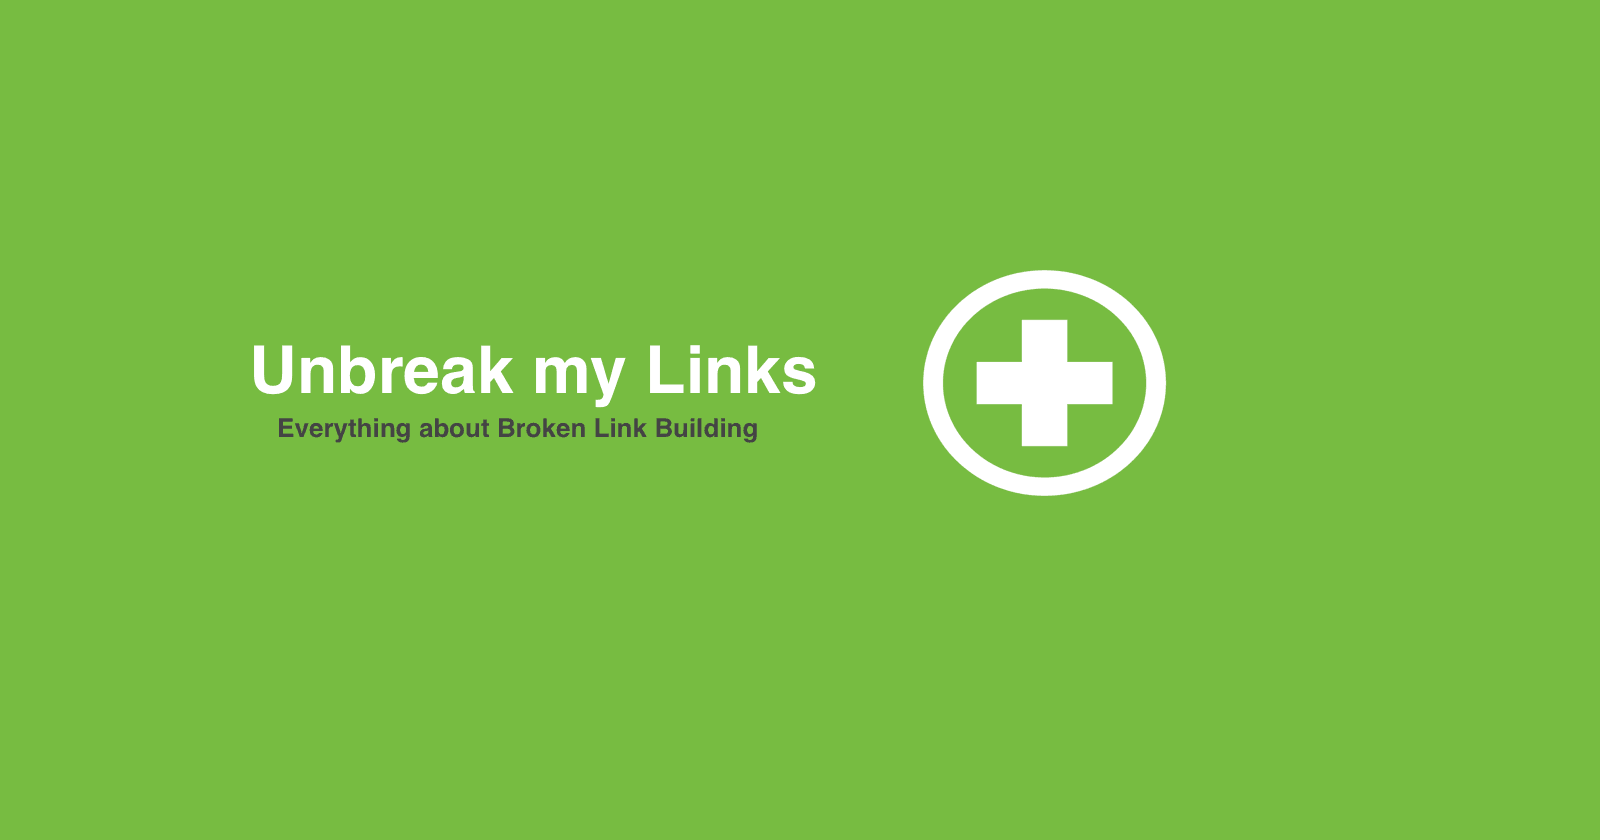 Everything You Need to Know About Broken Link Building